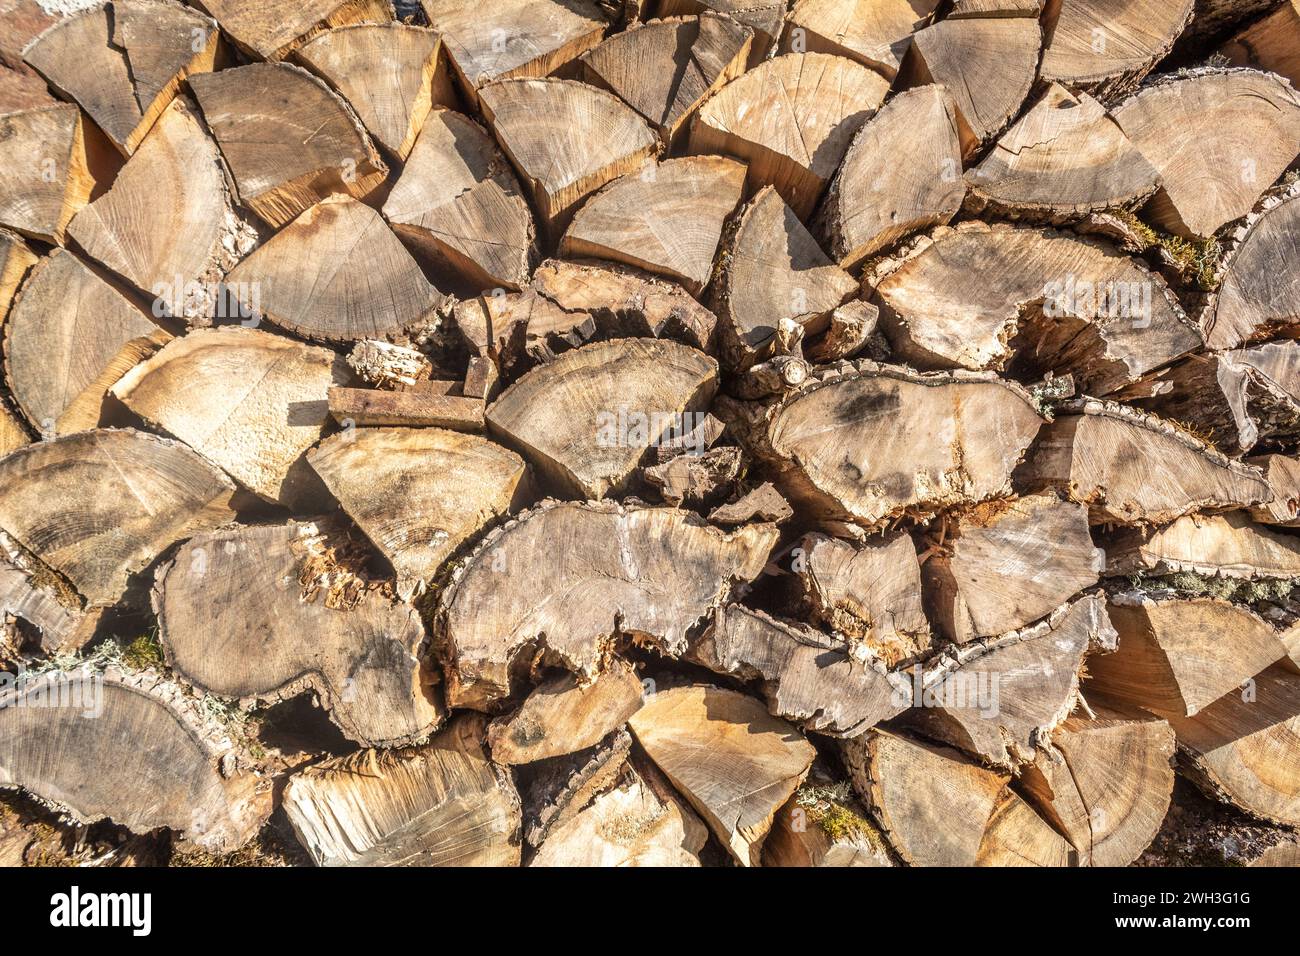 Close up shot of woodpile with logs of different sizes in Latvia Stock Photo